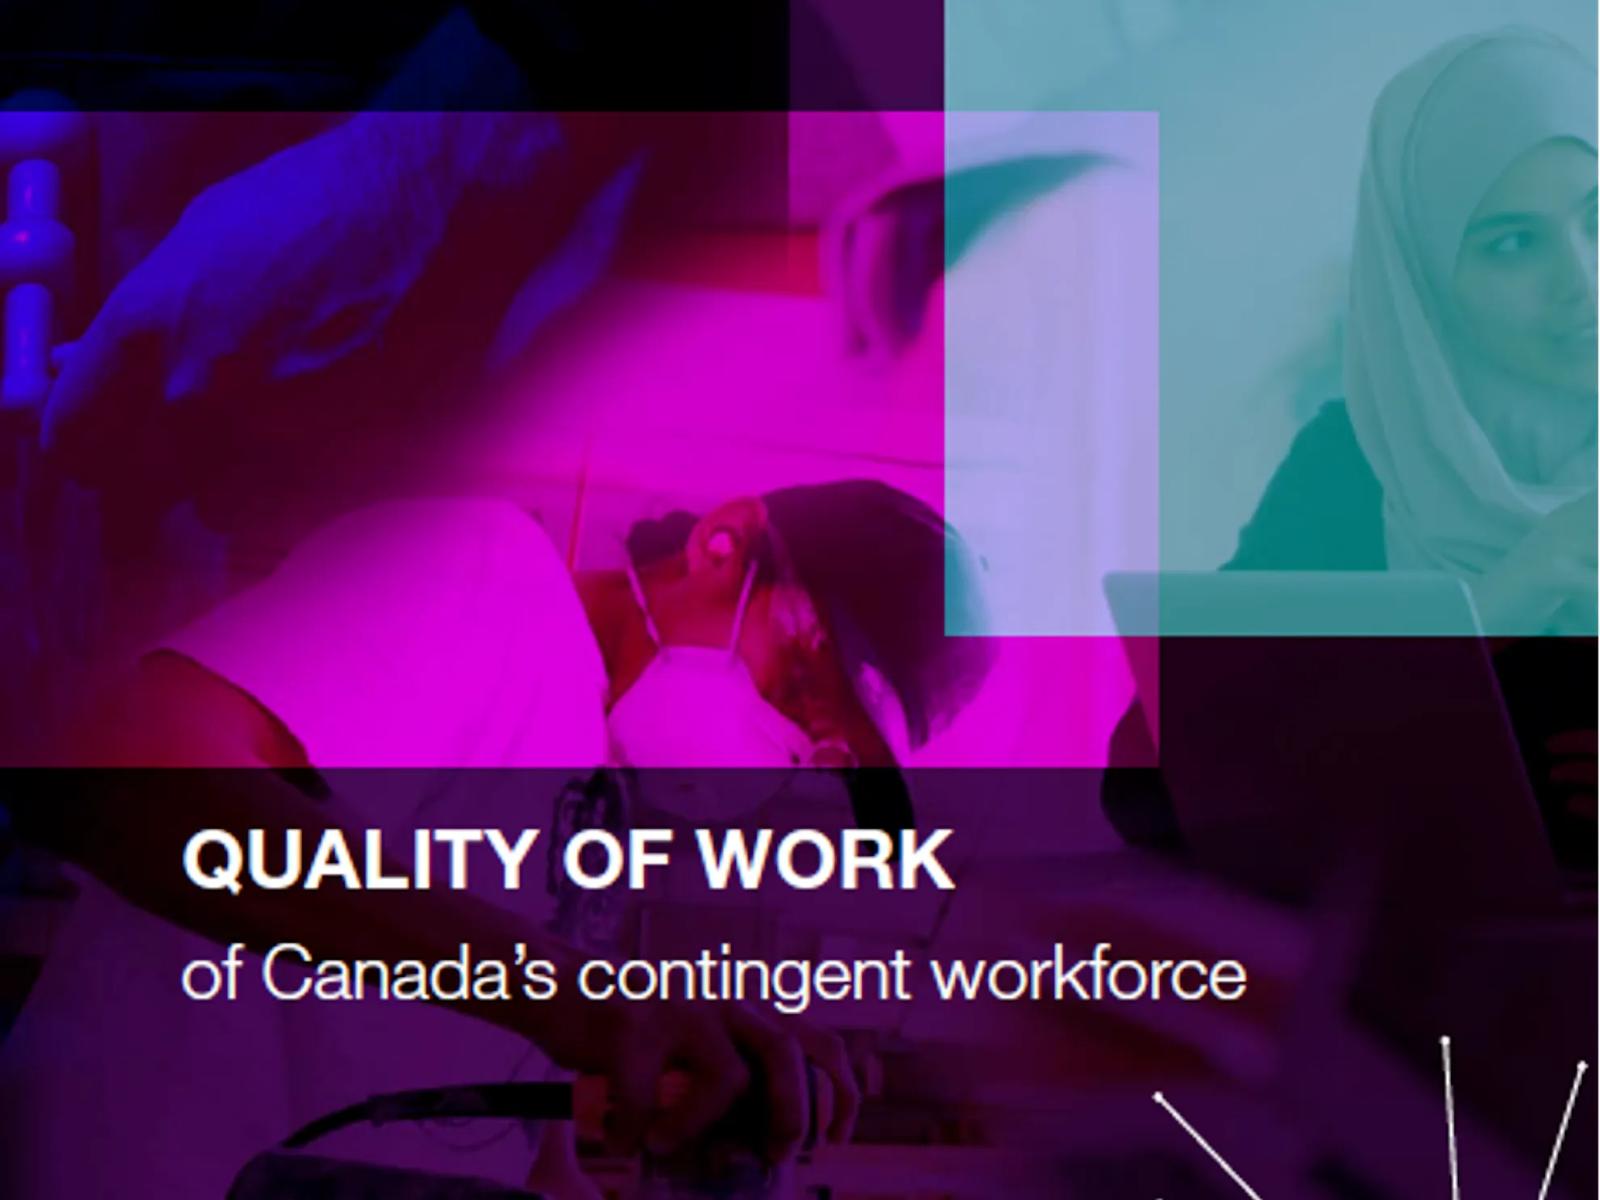 Quality of work of Canada’s contingent workforce